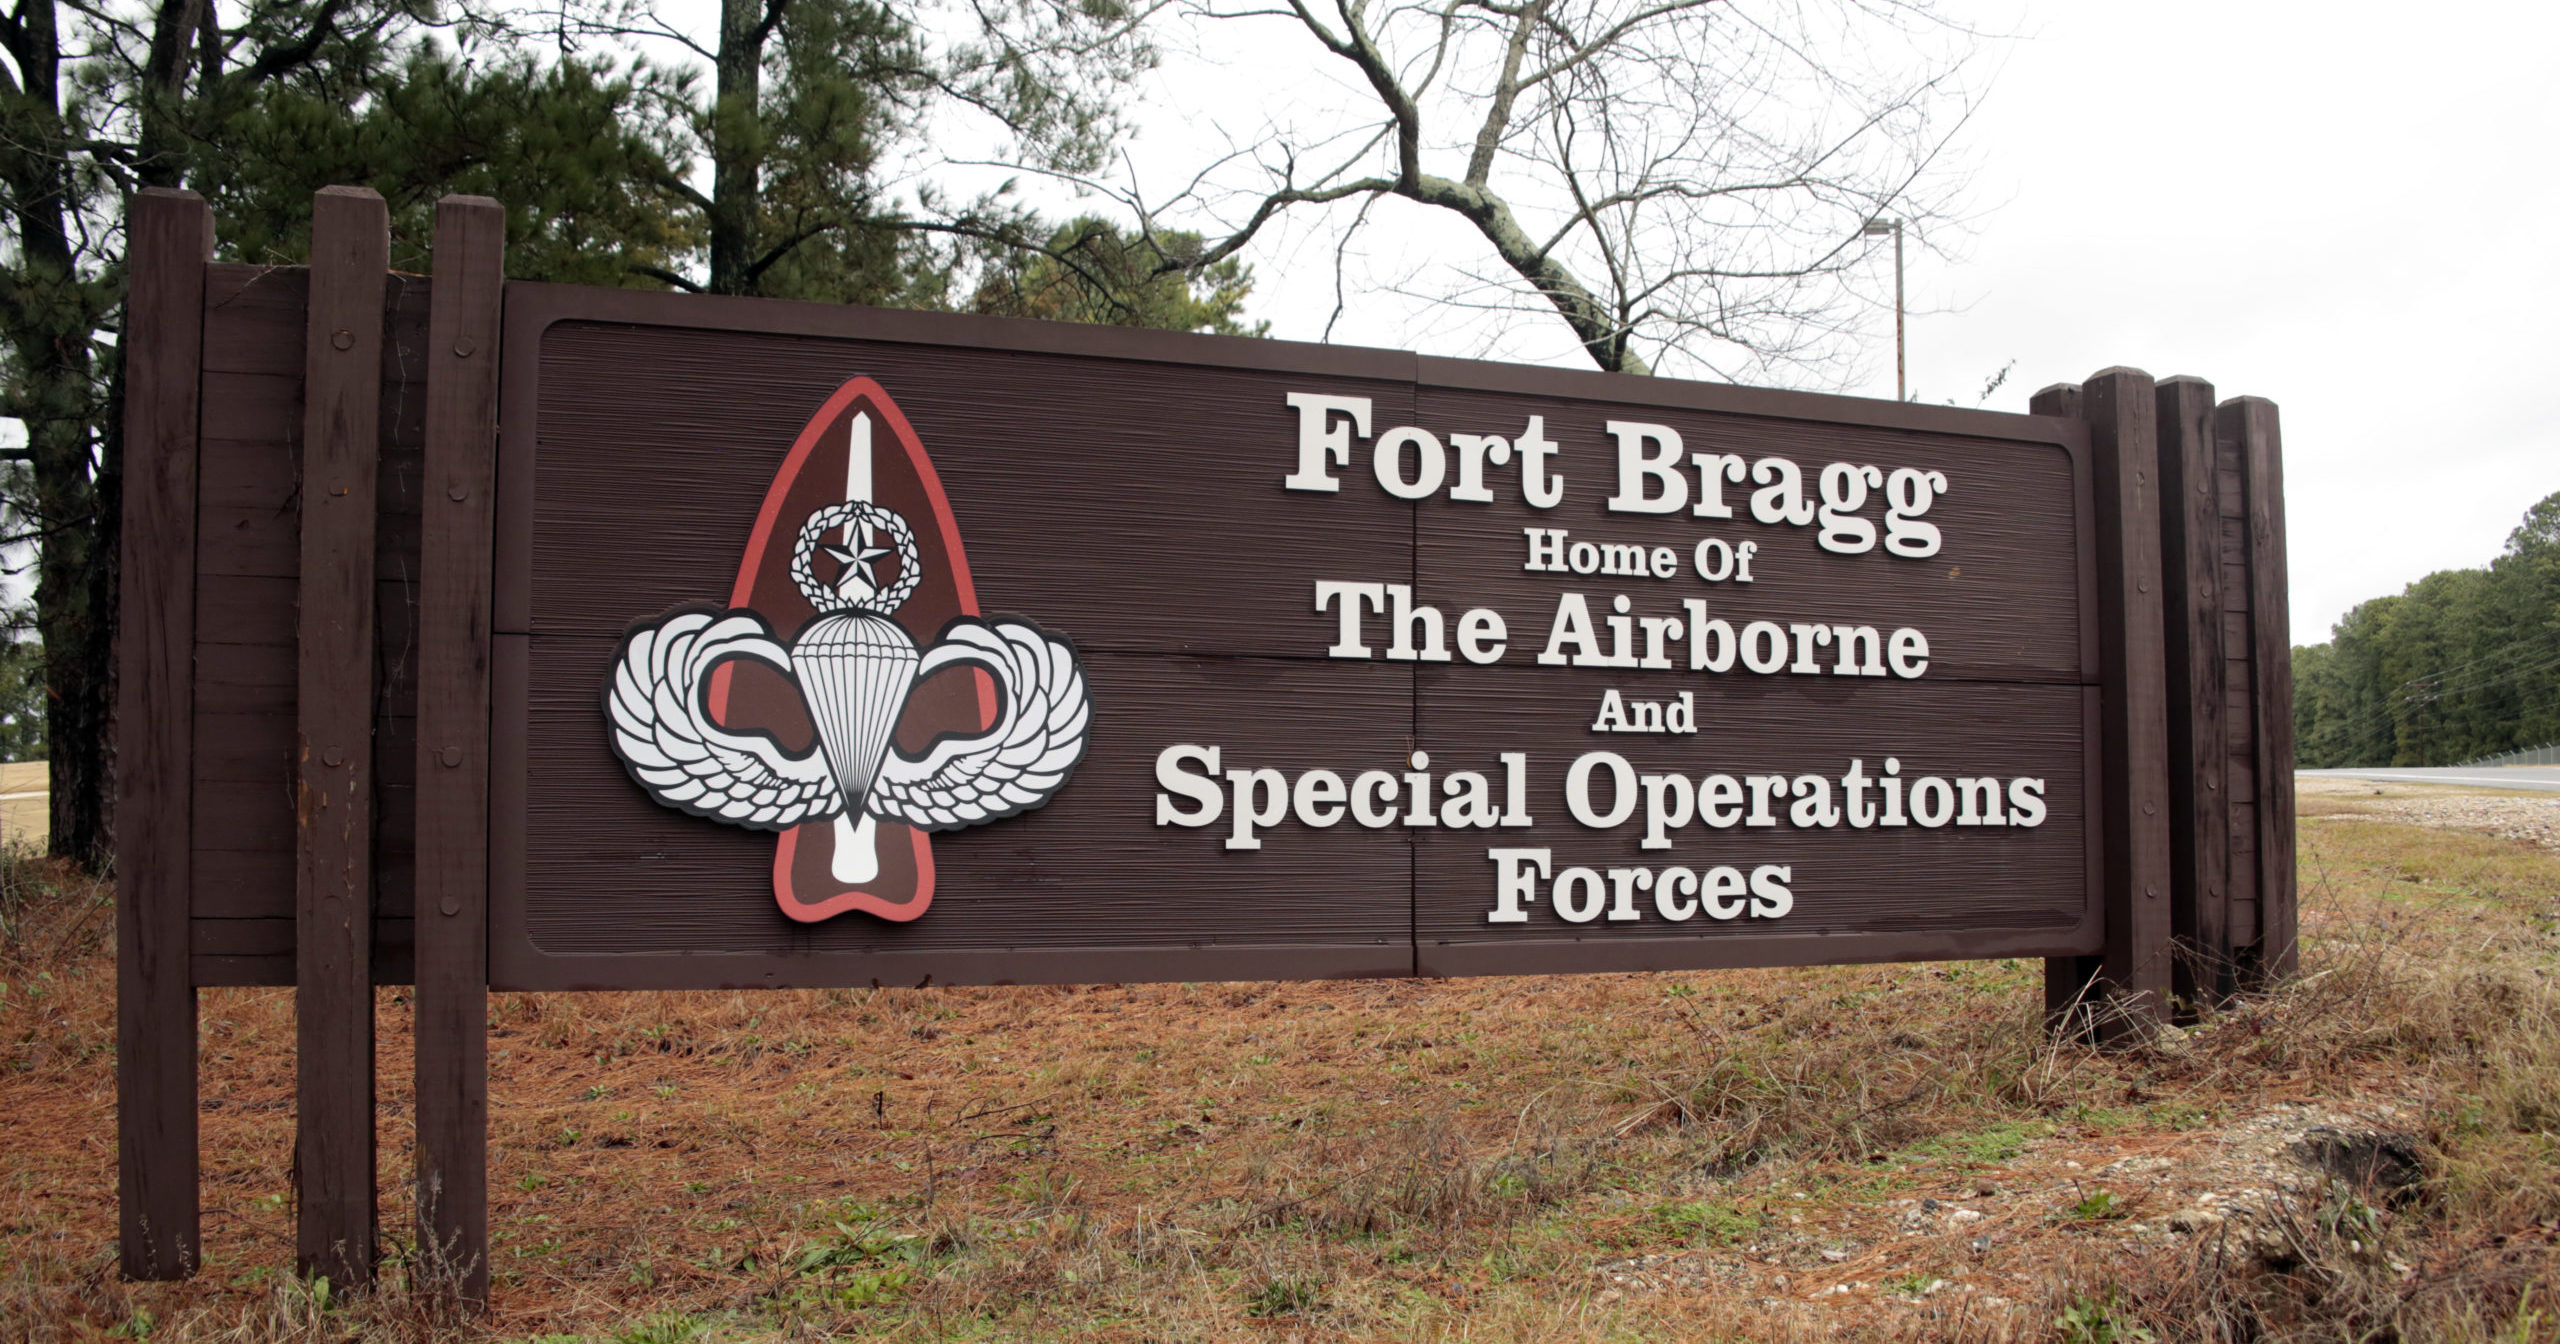 A sign is seen for Fort Bragg, North Carolina, on Jan. 4, 2020.